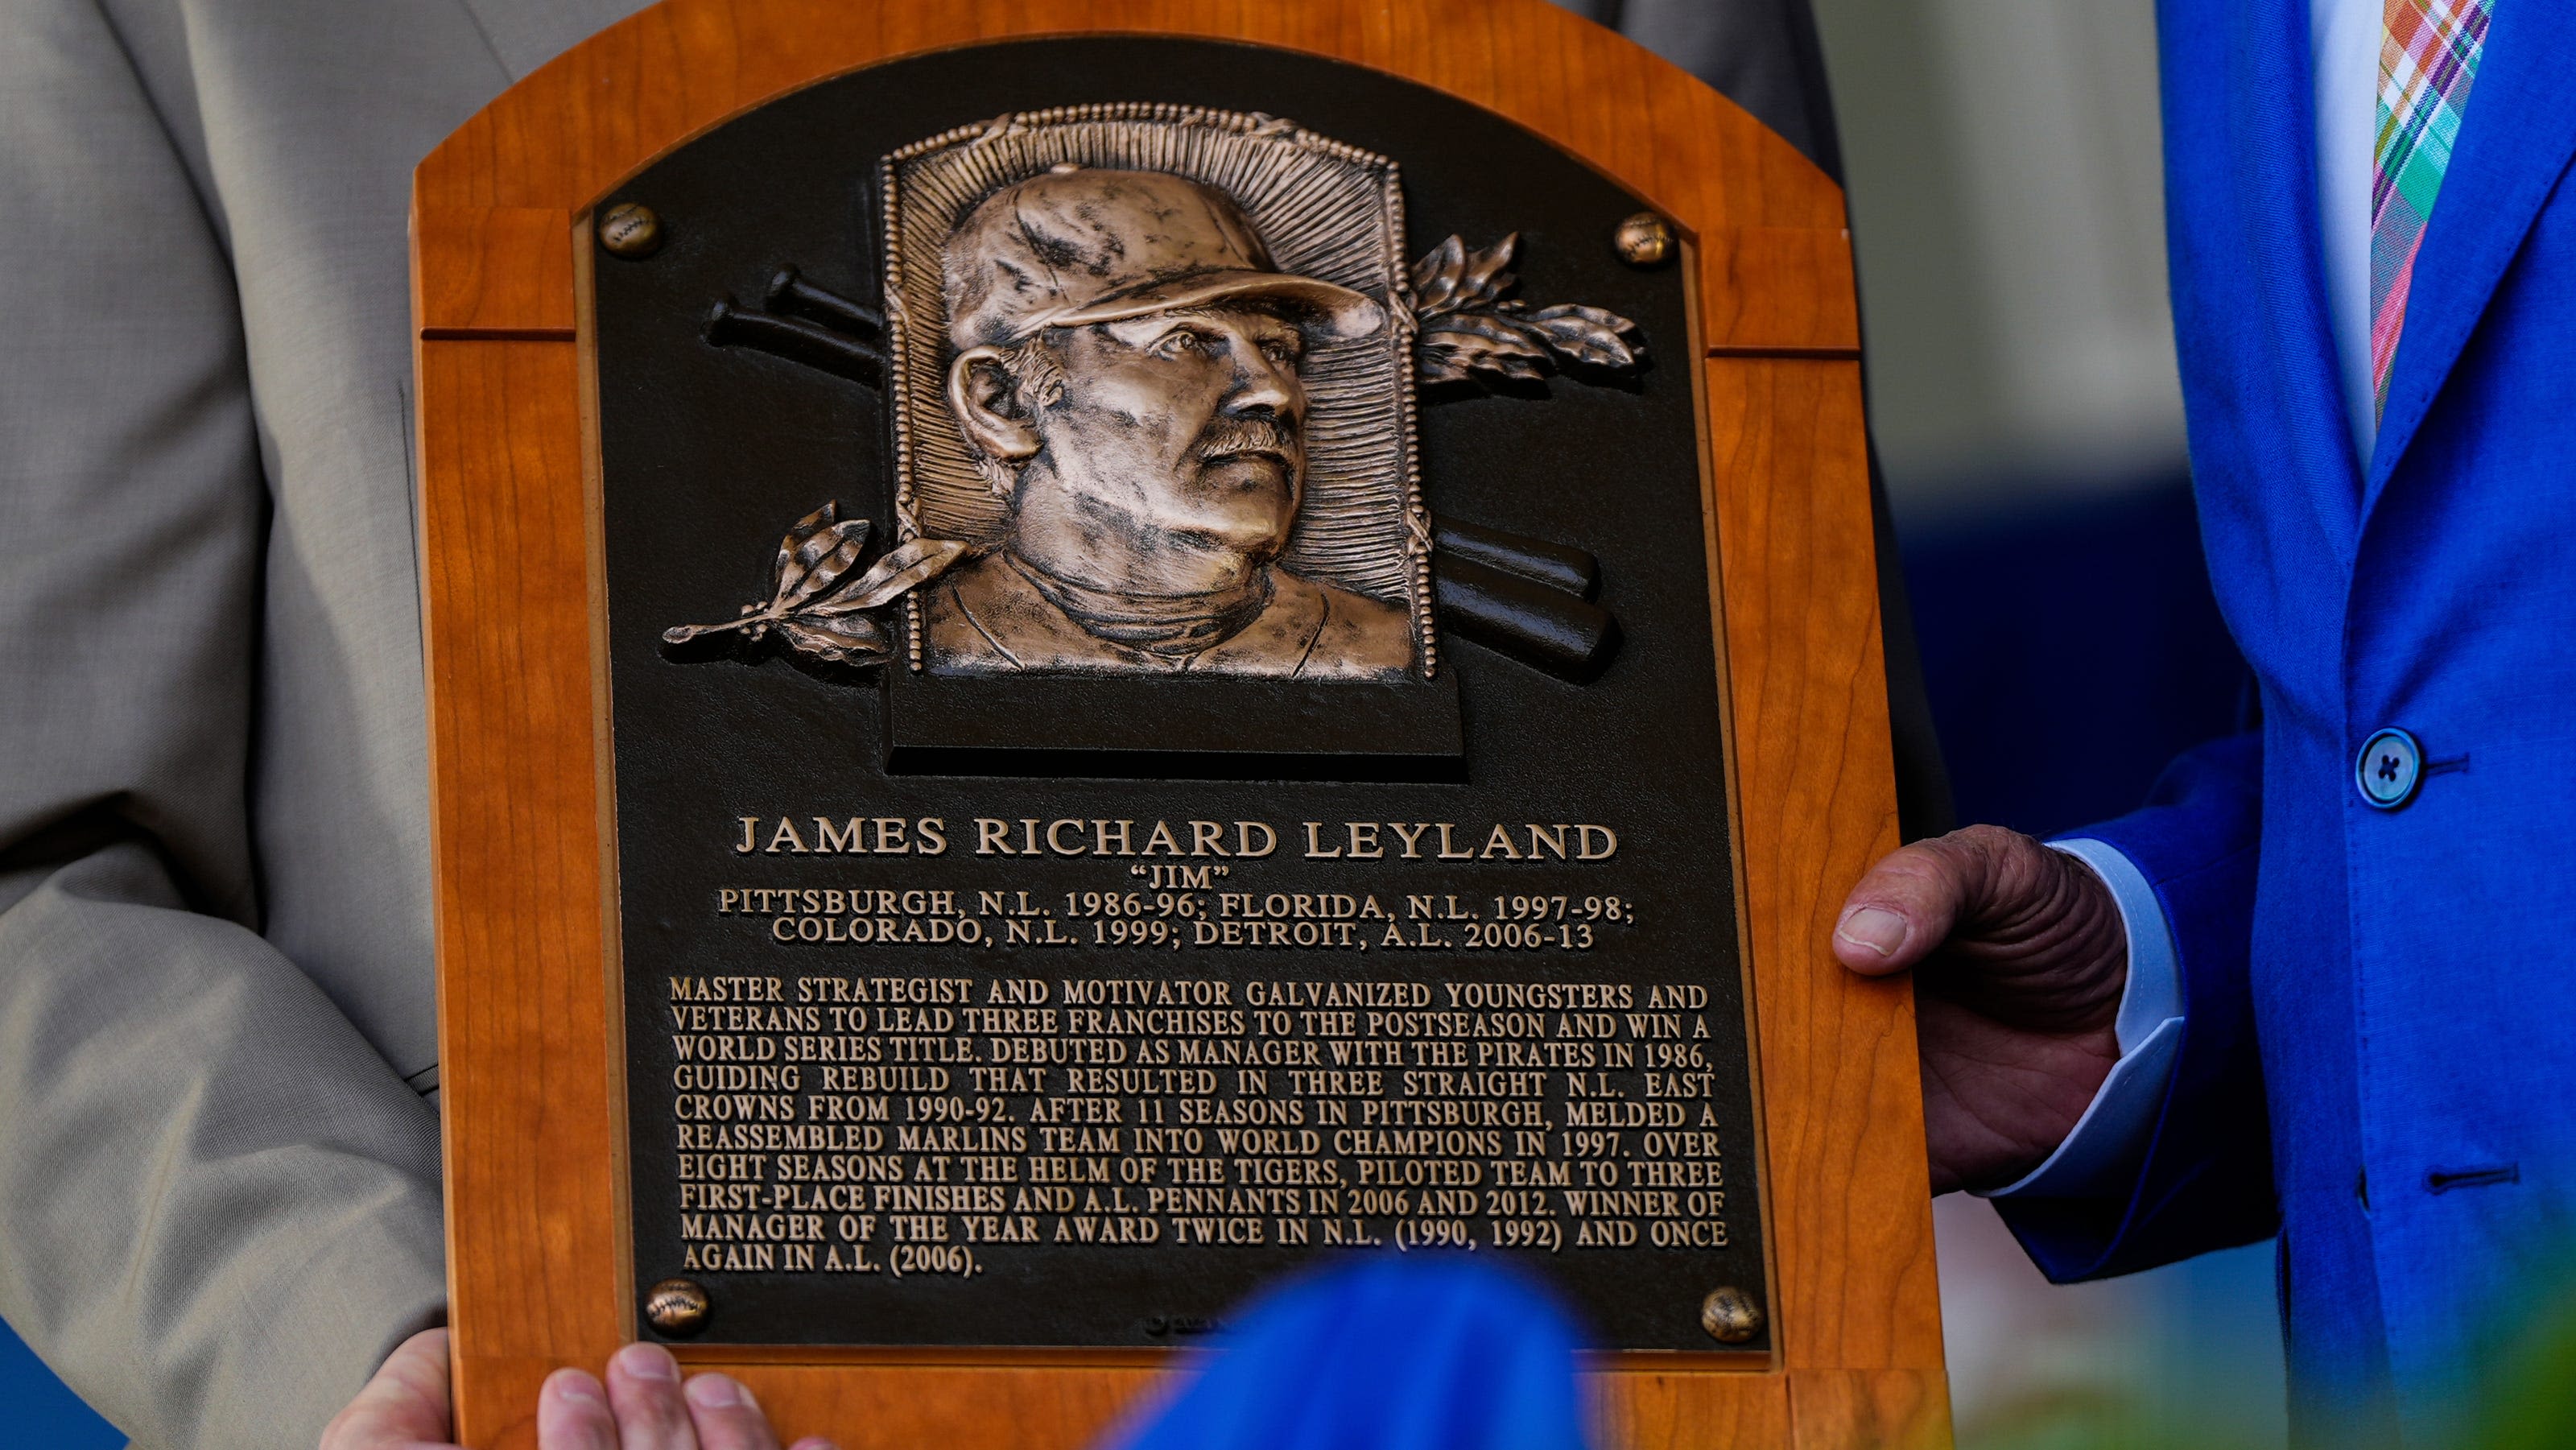 Jim Leyland's officially a Baseball Hall-of-Famer; here's what his plaque says